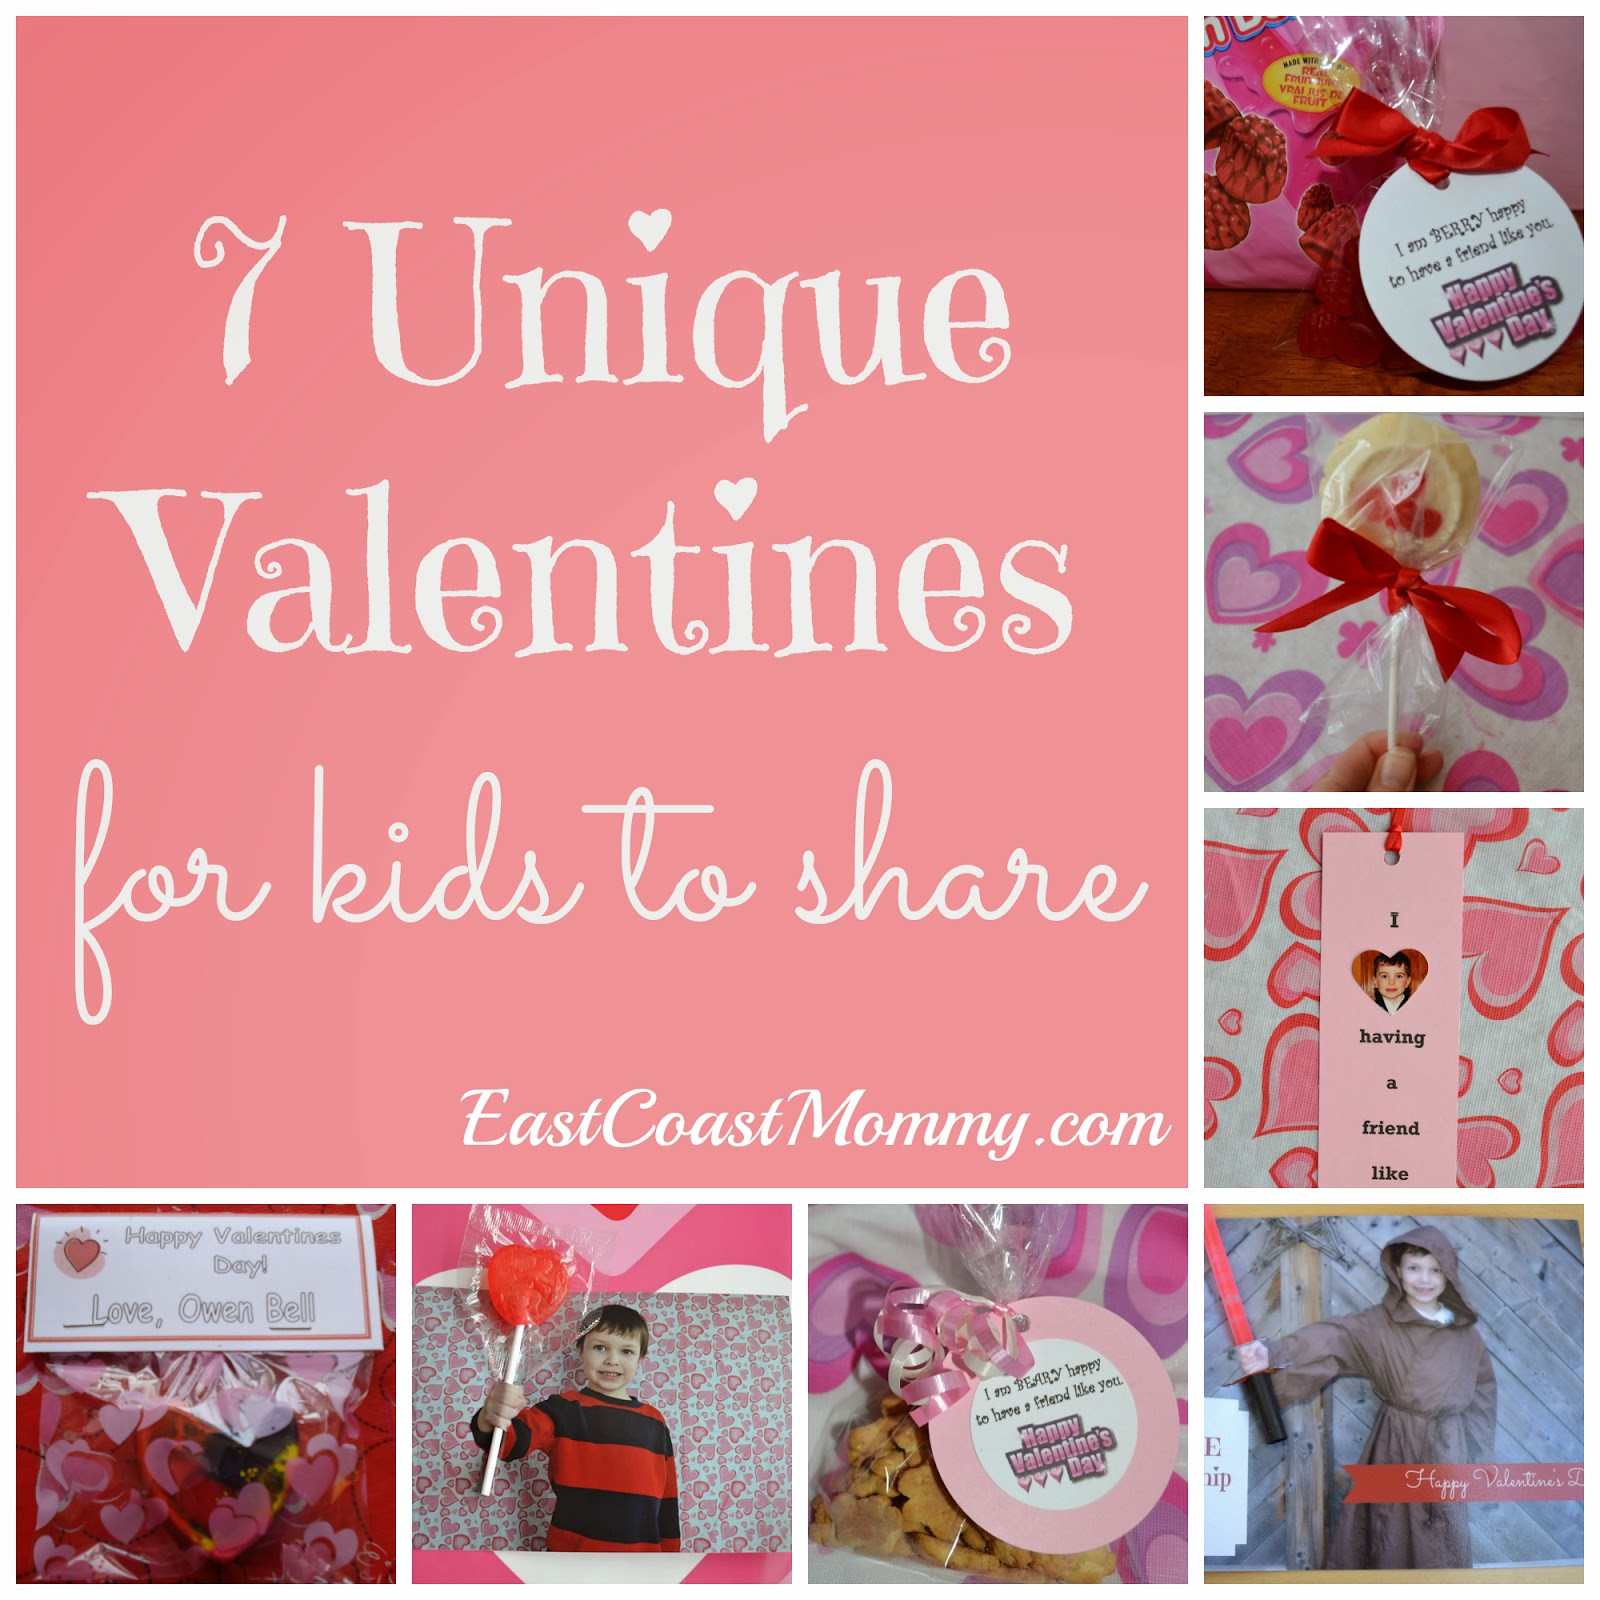 Unique Valentines Gift Ideas
 East Coast Mommy 7 Unique Valentines for kids to share